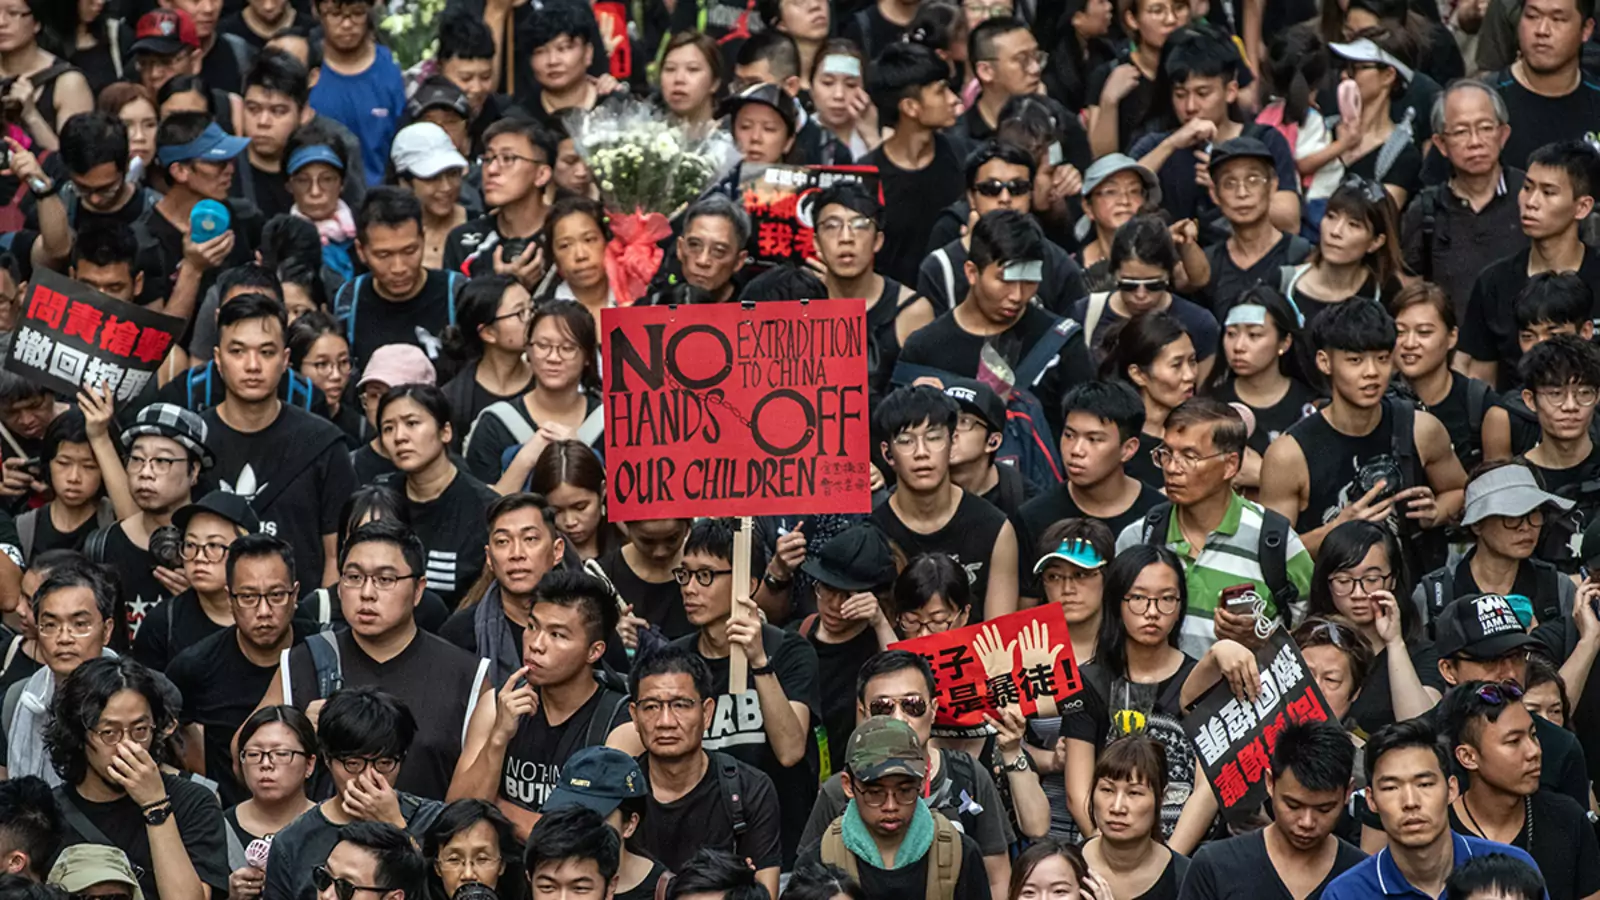 Protesters demonstrate against the extradition bill in Hong Kong on June 16, 2019.